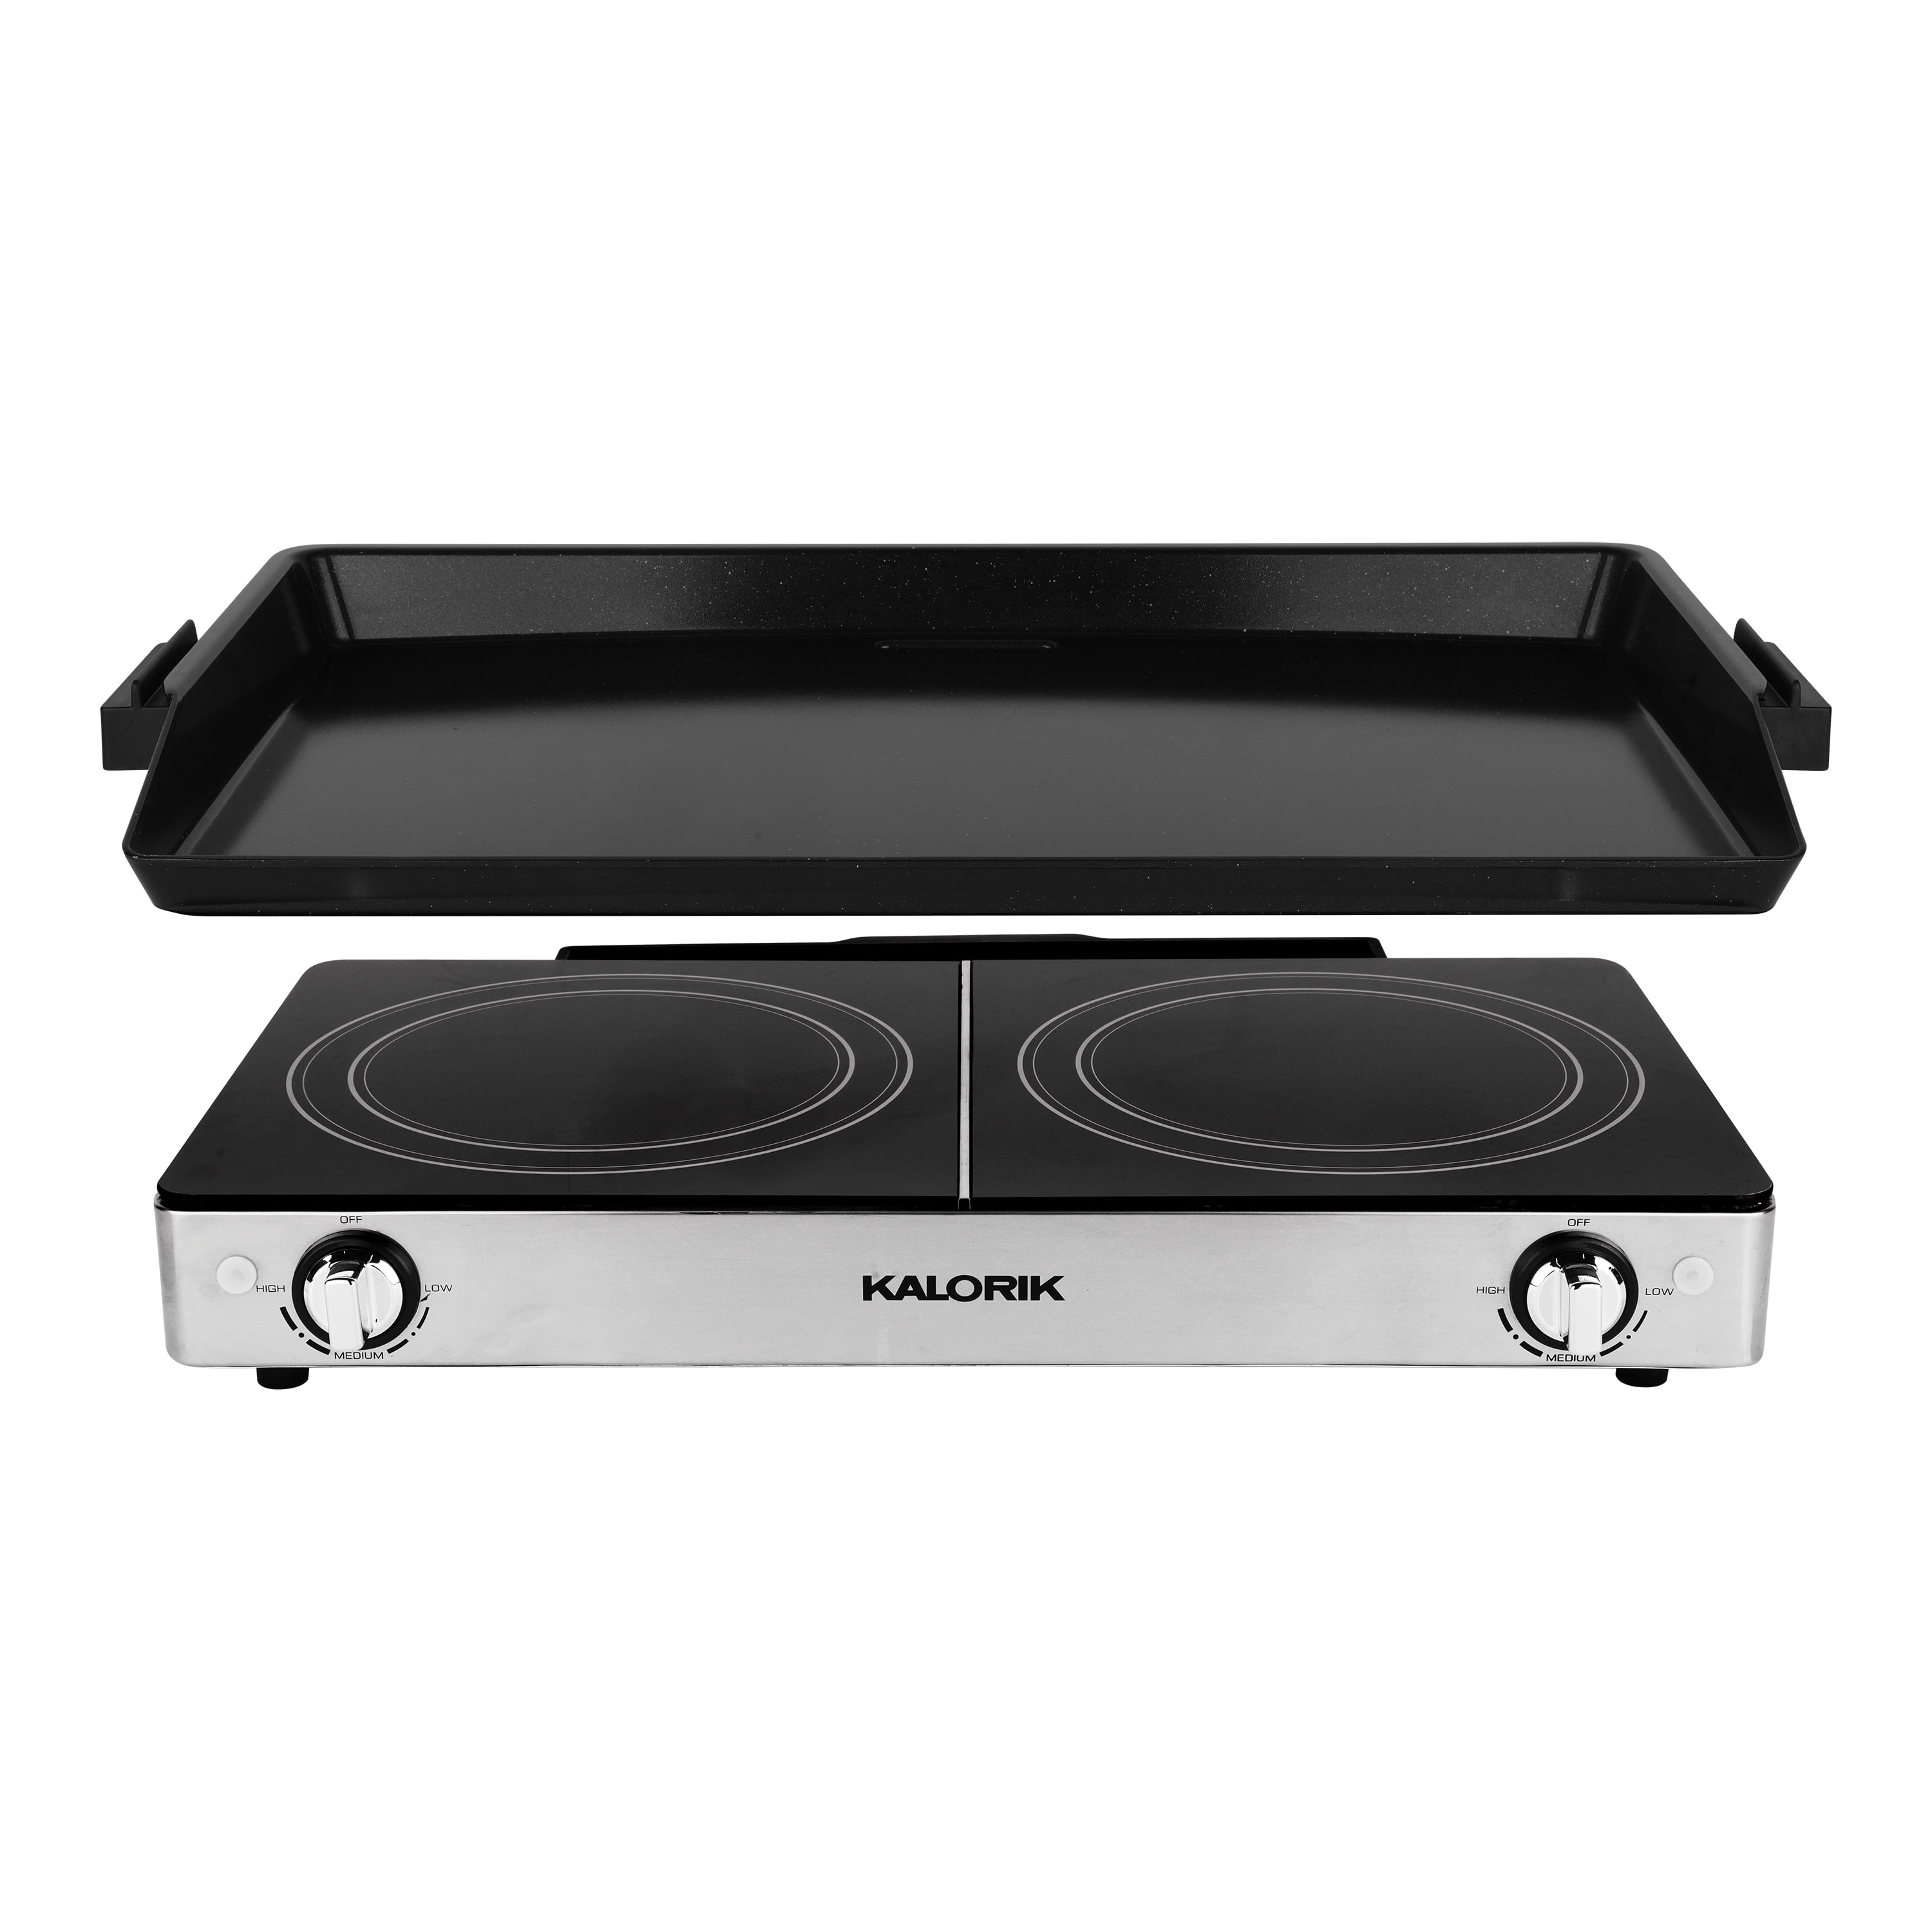  NUWAVE Flex Precision Induction Cooktop, 10.25” Shatter-Proof  Ceramic Glass, 6.5” Heating Coil, 45 Temps from 100°F to 500°F, 3 Wattage  Settings 600, 900 & 1300 Watts, 9” Duralon Ceramic Pan Included: Home &  Kitchen